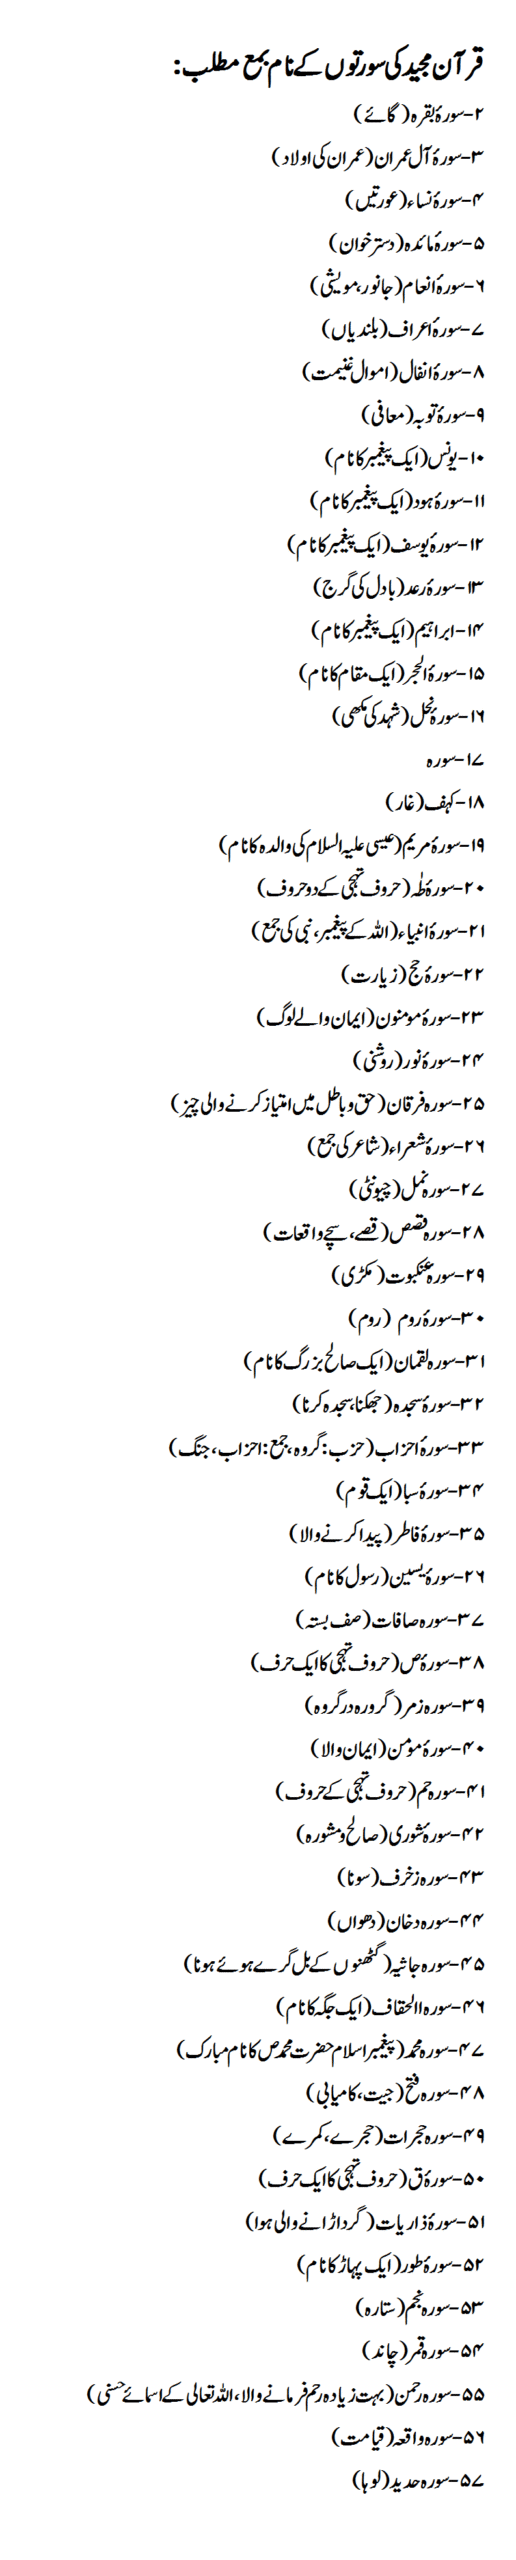 Names of Surahs of Quran with Meaning